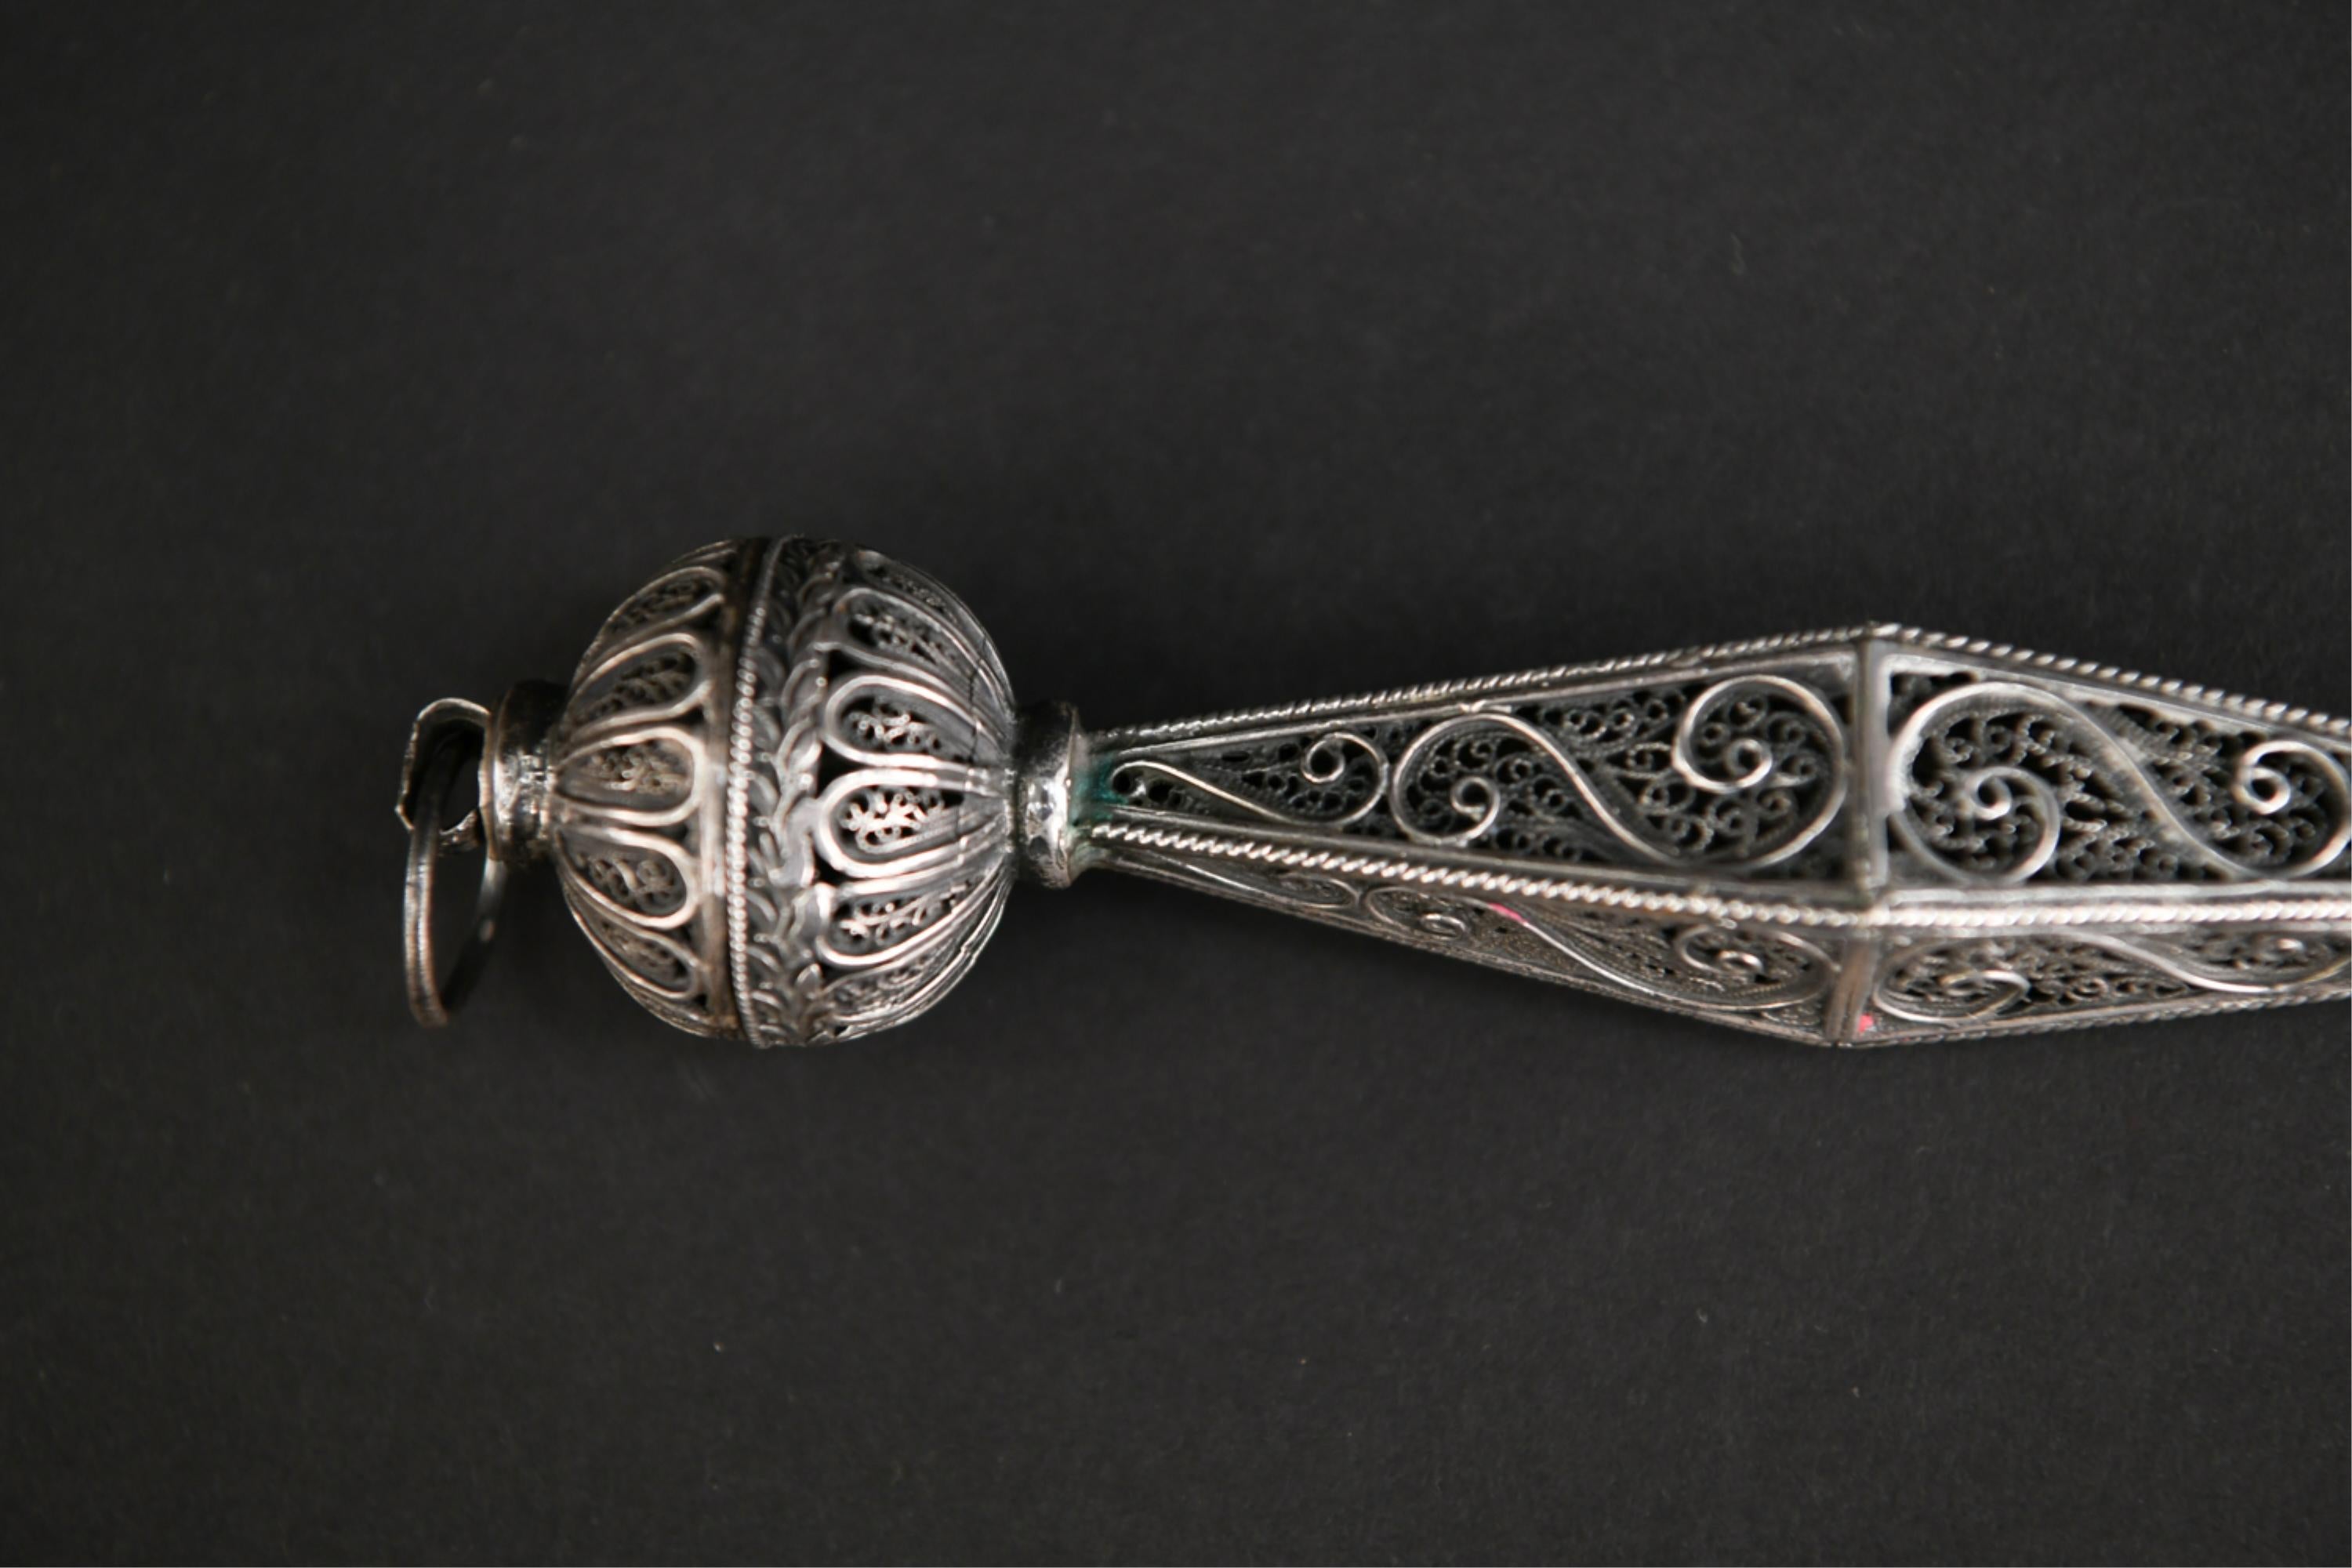 The intricate openwork floral and scroll motifs of this Torah pointer - known as a Yad - indicate the work of a master silver artist. Yad is stamped 